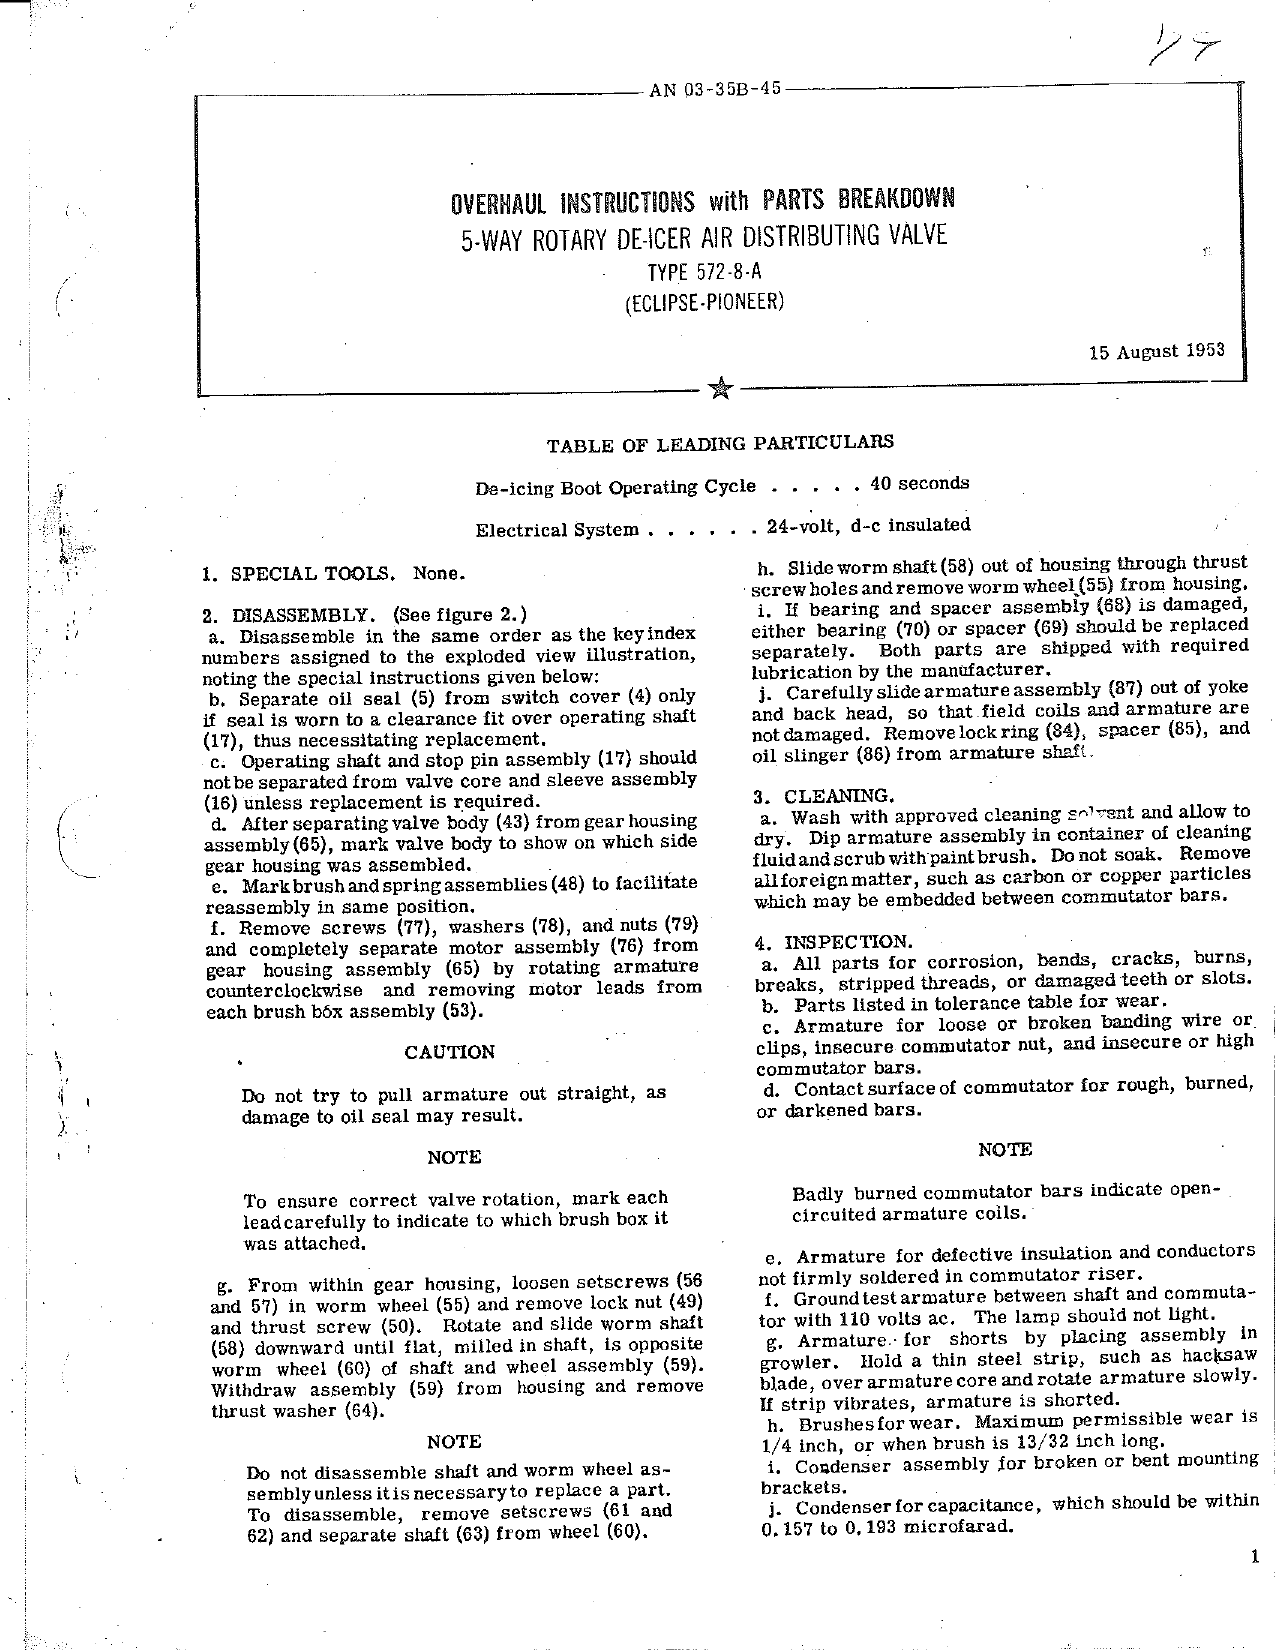 Sample page 1 from AirCorps Library document: Overhaul Instructions with Parts Breakdown for 5-Way Rotary De-Icer Air Distributing Valve - Type 572-8-A 